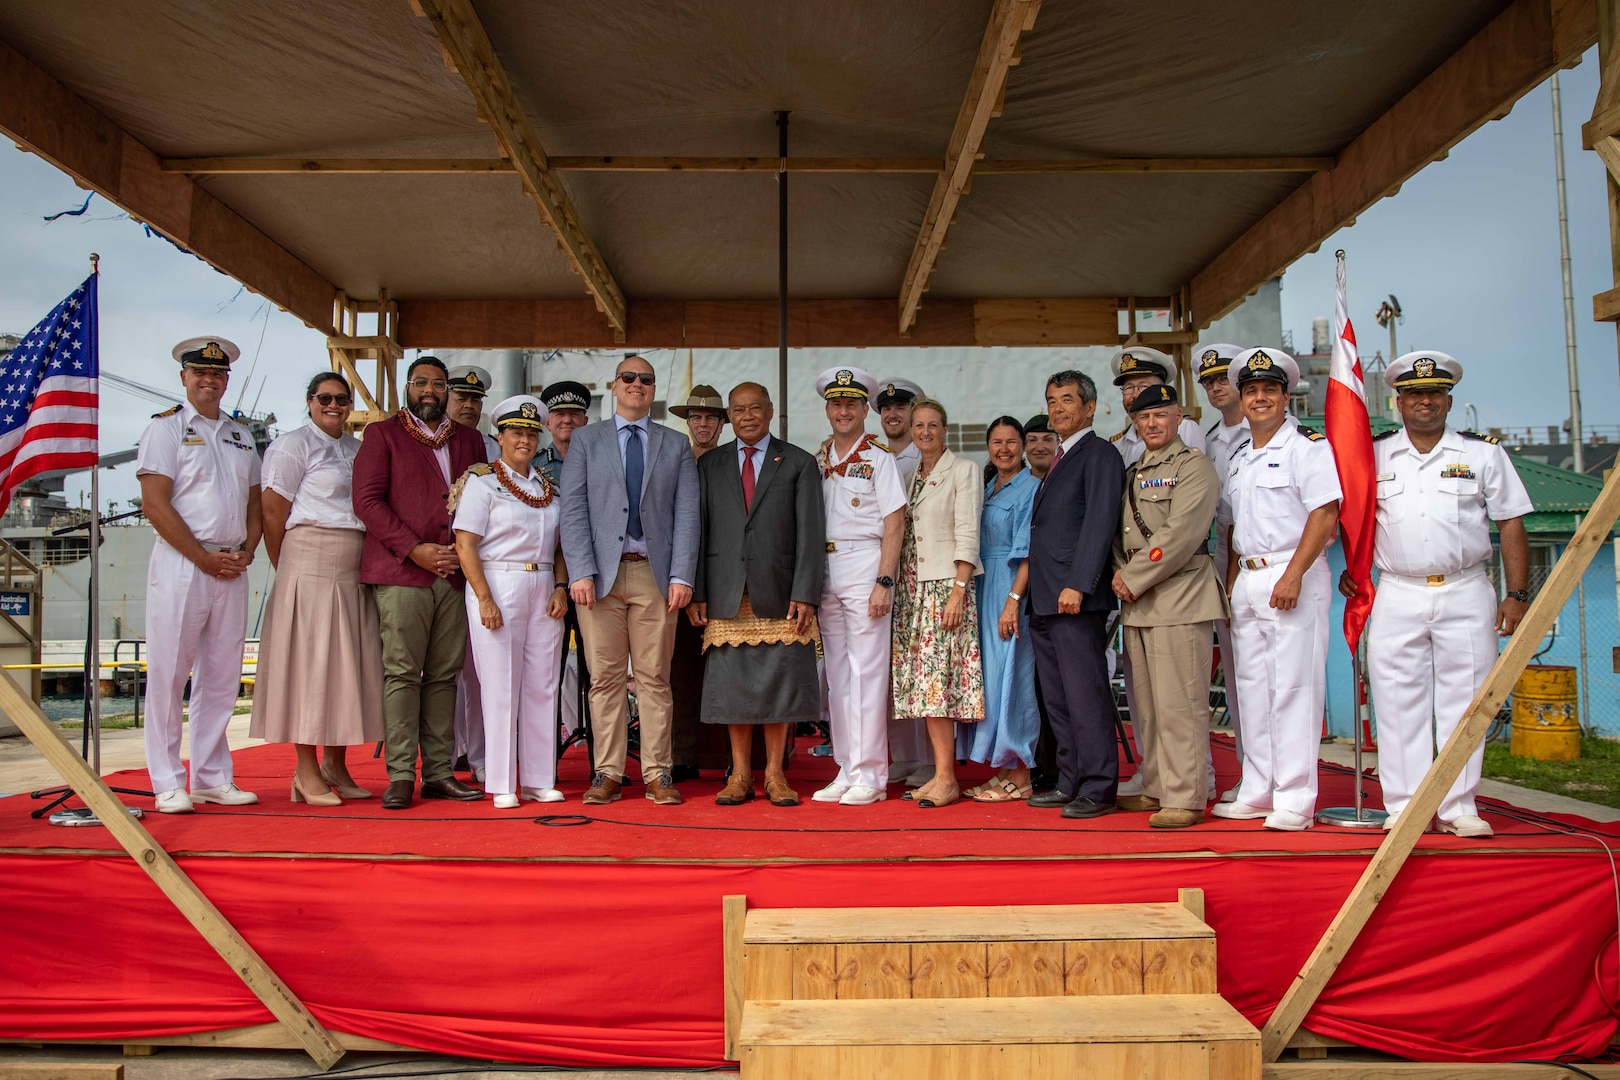 NUKU’ALOFA, Tonga (Nov. 20, 2023) – Representatives of the Royal Navy, Royal Australian Navy, Royal New Zealand Navy, Royal Canadian Navy, Chilean Armed Forces, government of Tonga and the U.S. Navy pose for a group photo after the Pacific Partnership 2023 Tonga closing ceremony in front of Harpers Ferry-class dock landing ship USS Pearl Harbor (LSD 52) , Nov. 20.  Now in its 18th year, Pacific Partnership is the largest annual multinational humanitarian assistance and disaster relief preparedness mission conducted in the Indo-Pacific. (U.S. Navy photo by Mass Communication Specialist 2nd Class Megan Alexander)